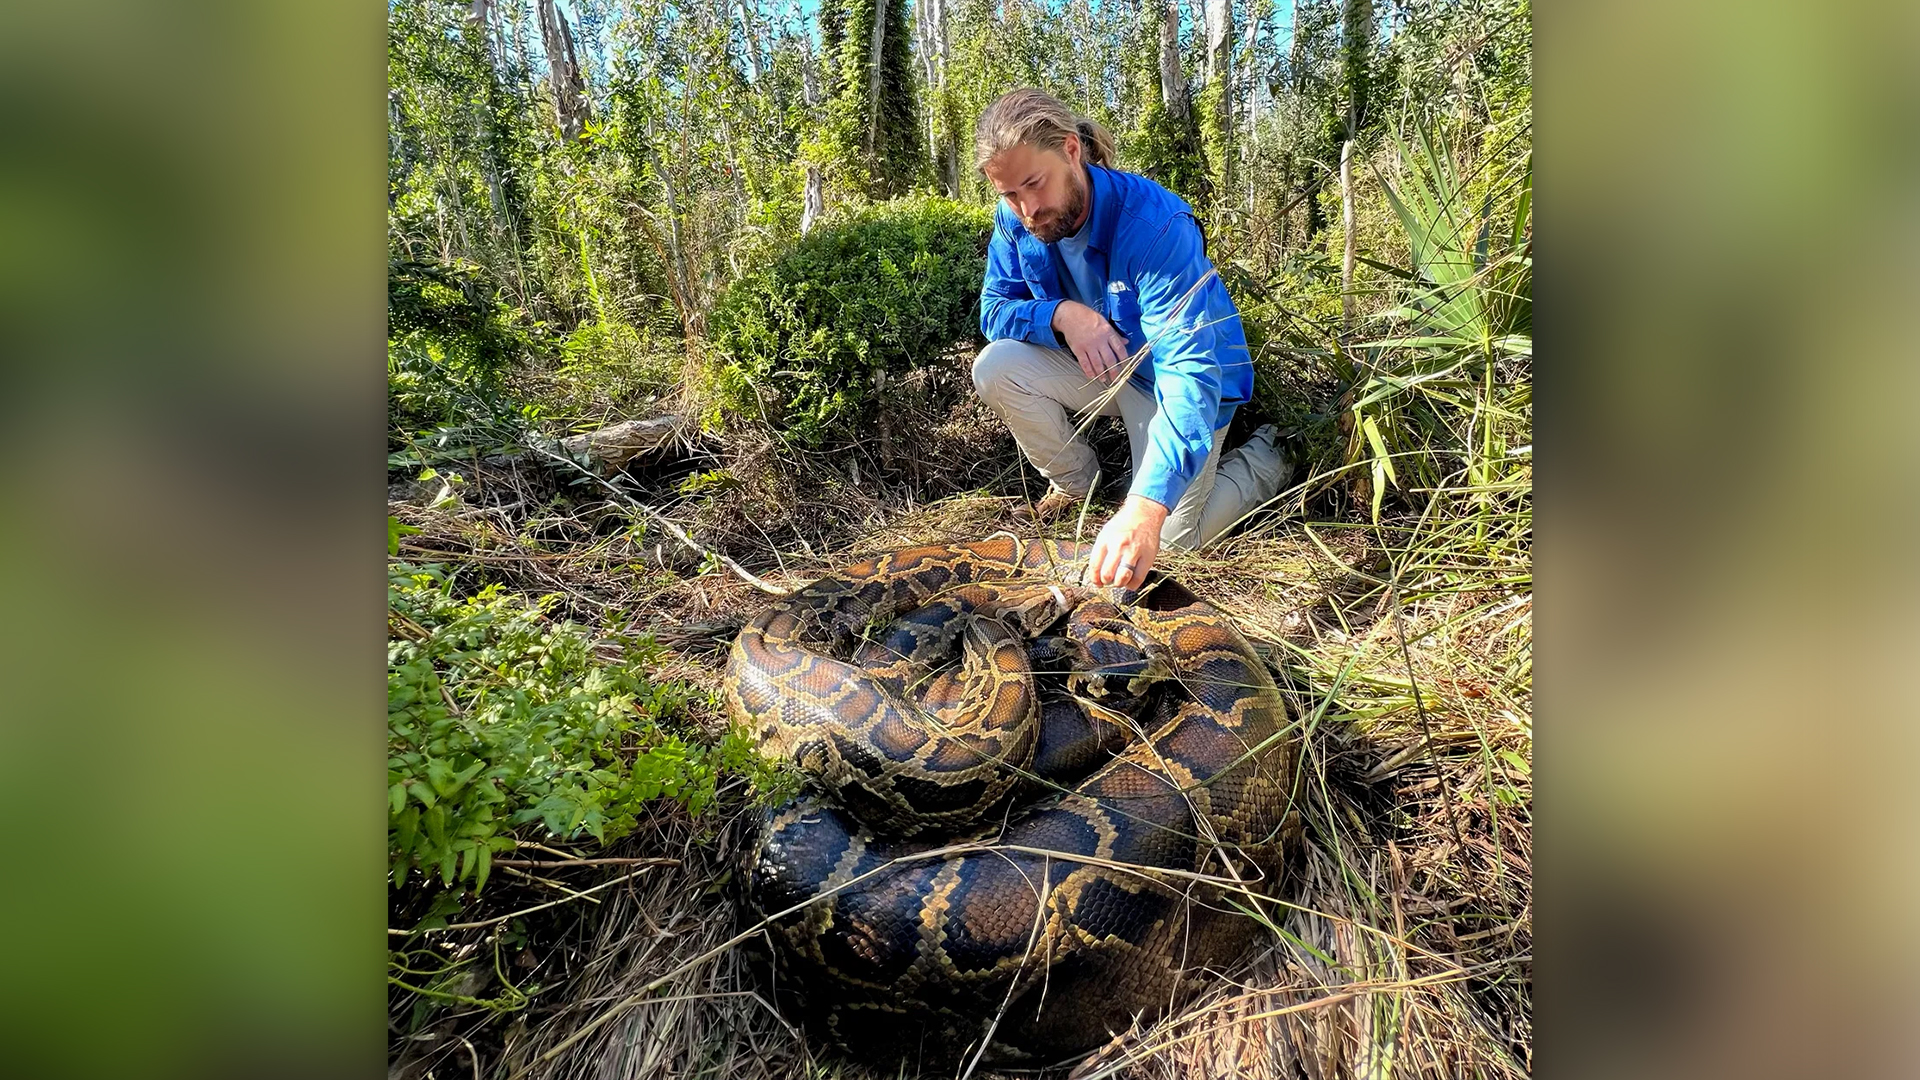 Researcher holds a huge python in the forest.